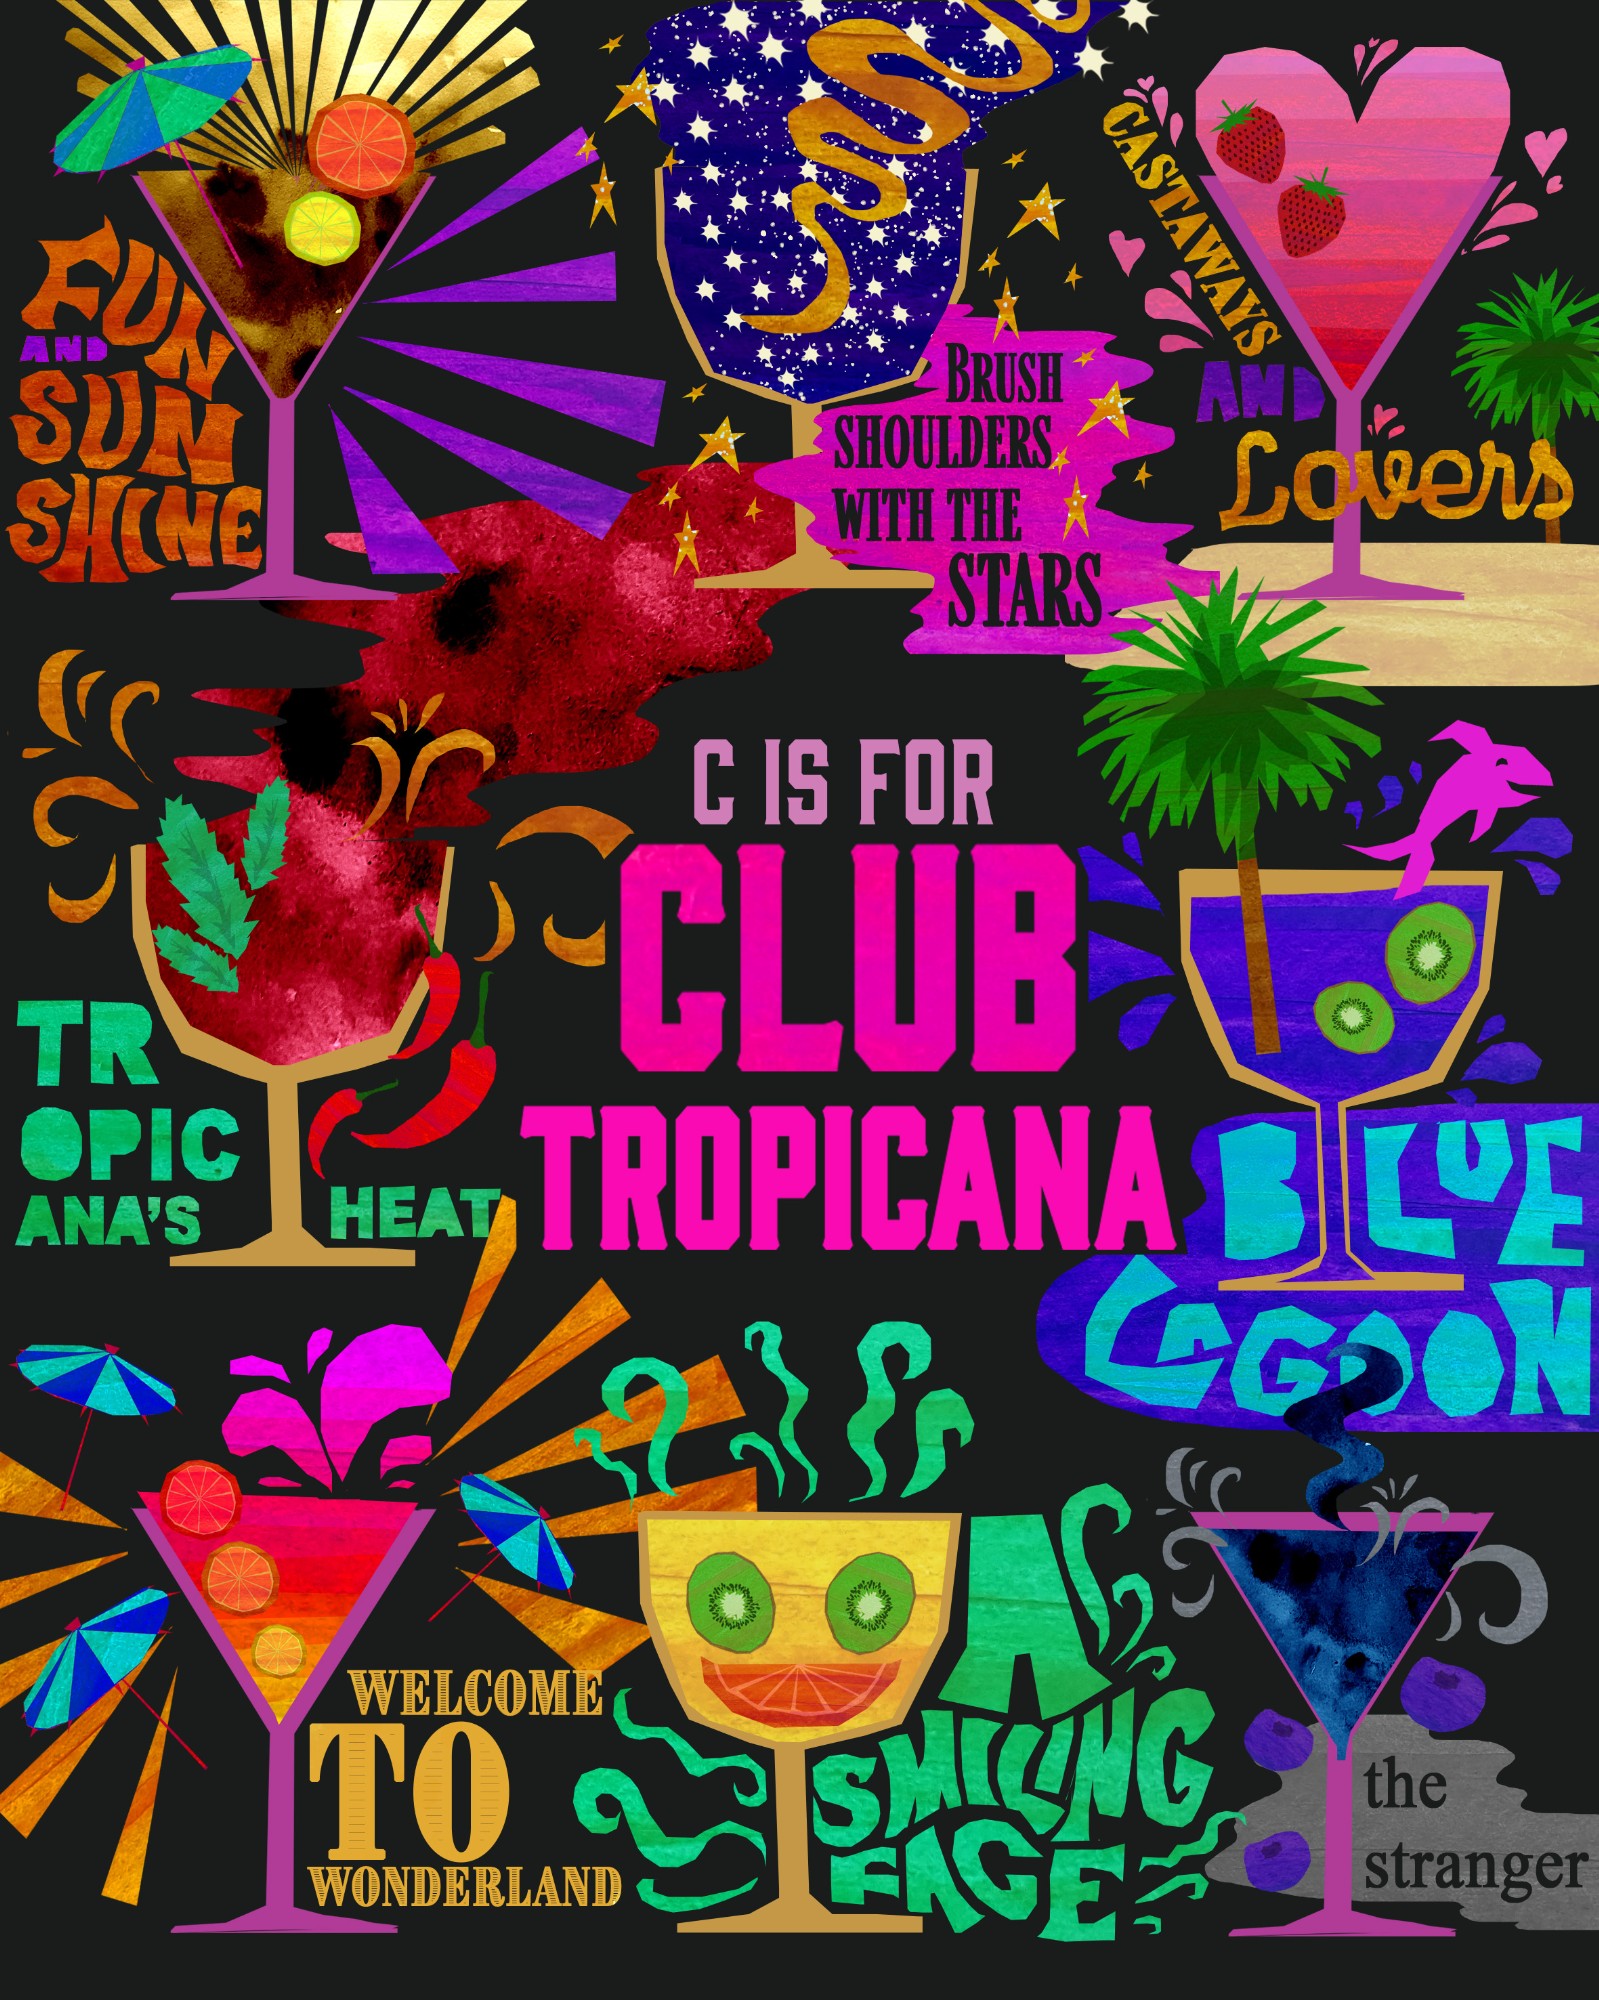 A page from my book “The ABC of the 80’s”, inspired by the lyrics and themes of Club Tropicana by Wham.